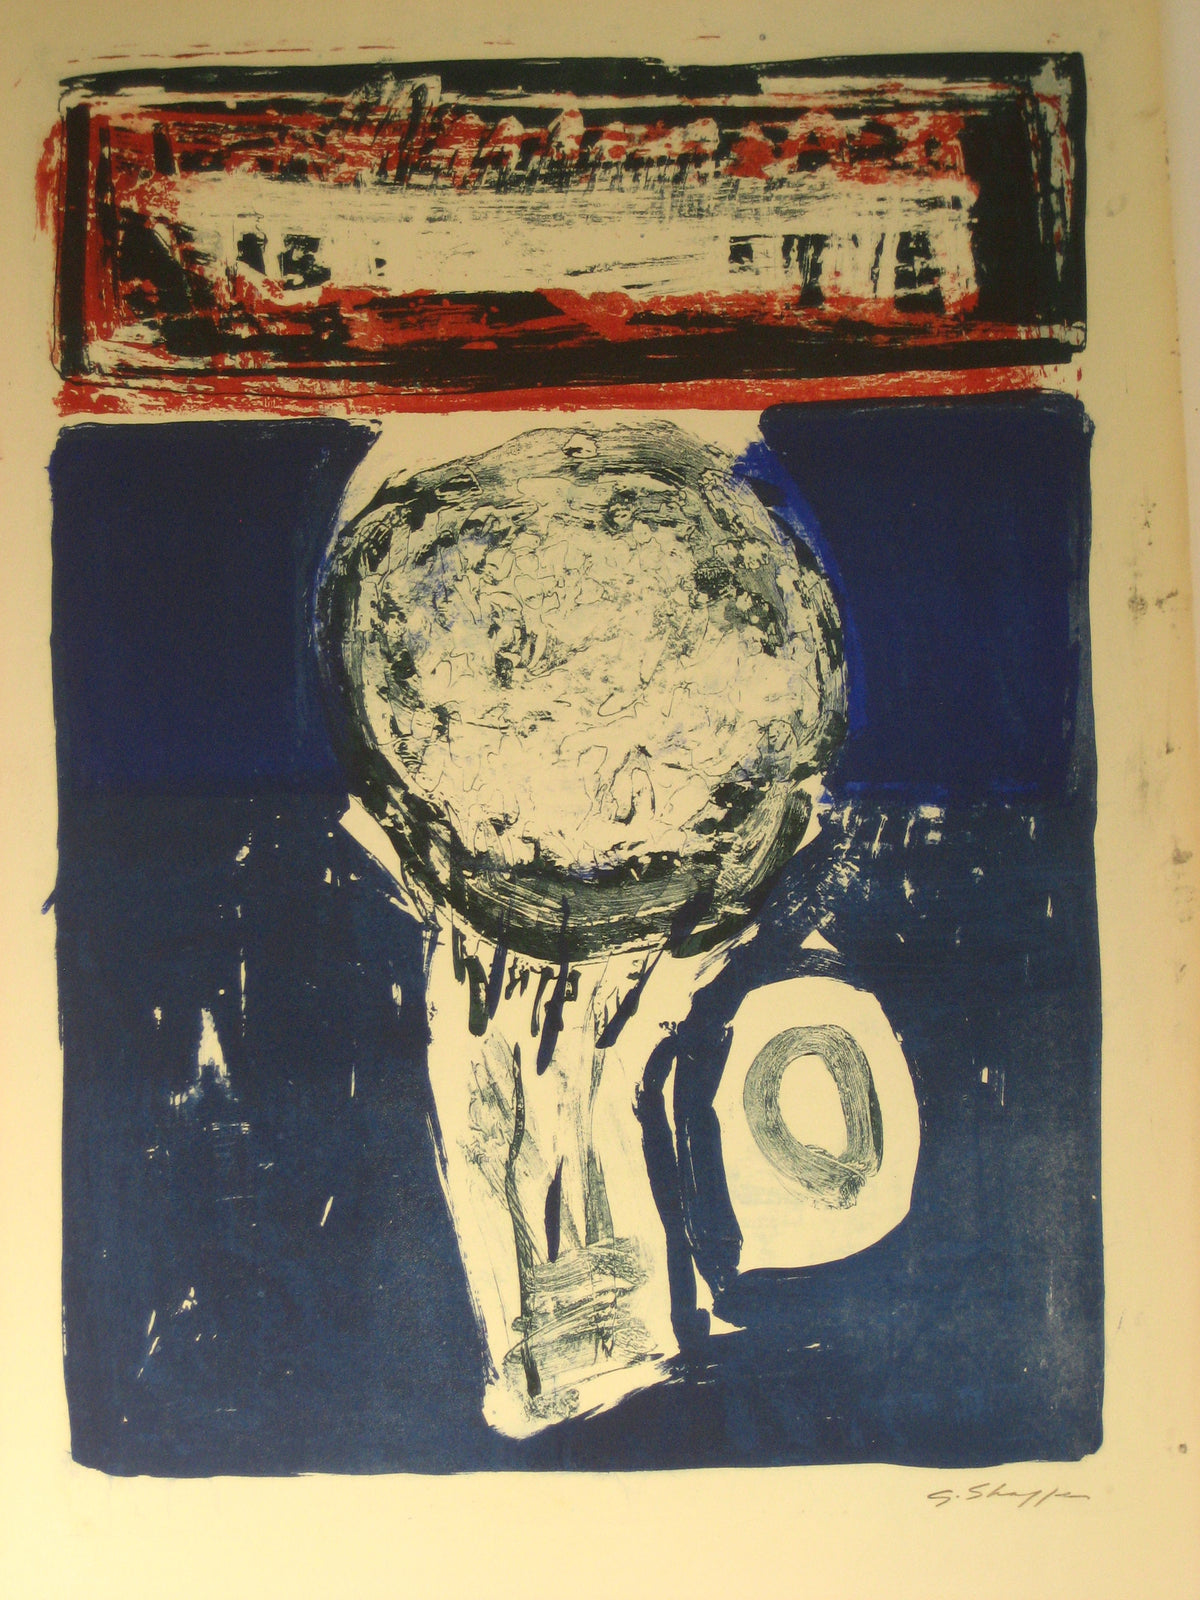 Abstracted Contrasting Forms&lt;br&gt;1965 Stone Lithograph&lt;br&gt;&lt;br&gt;#6419